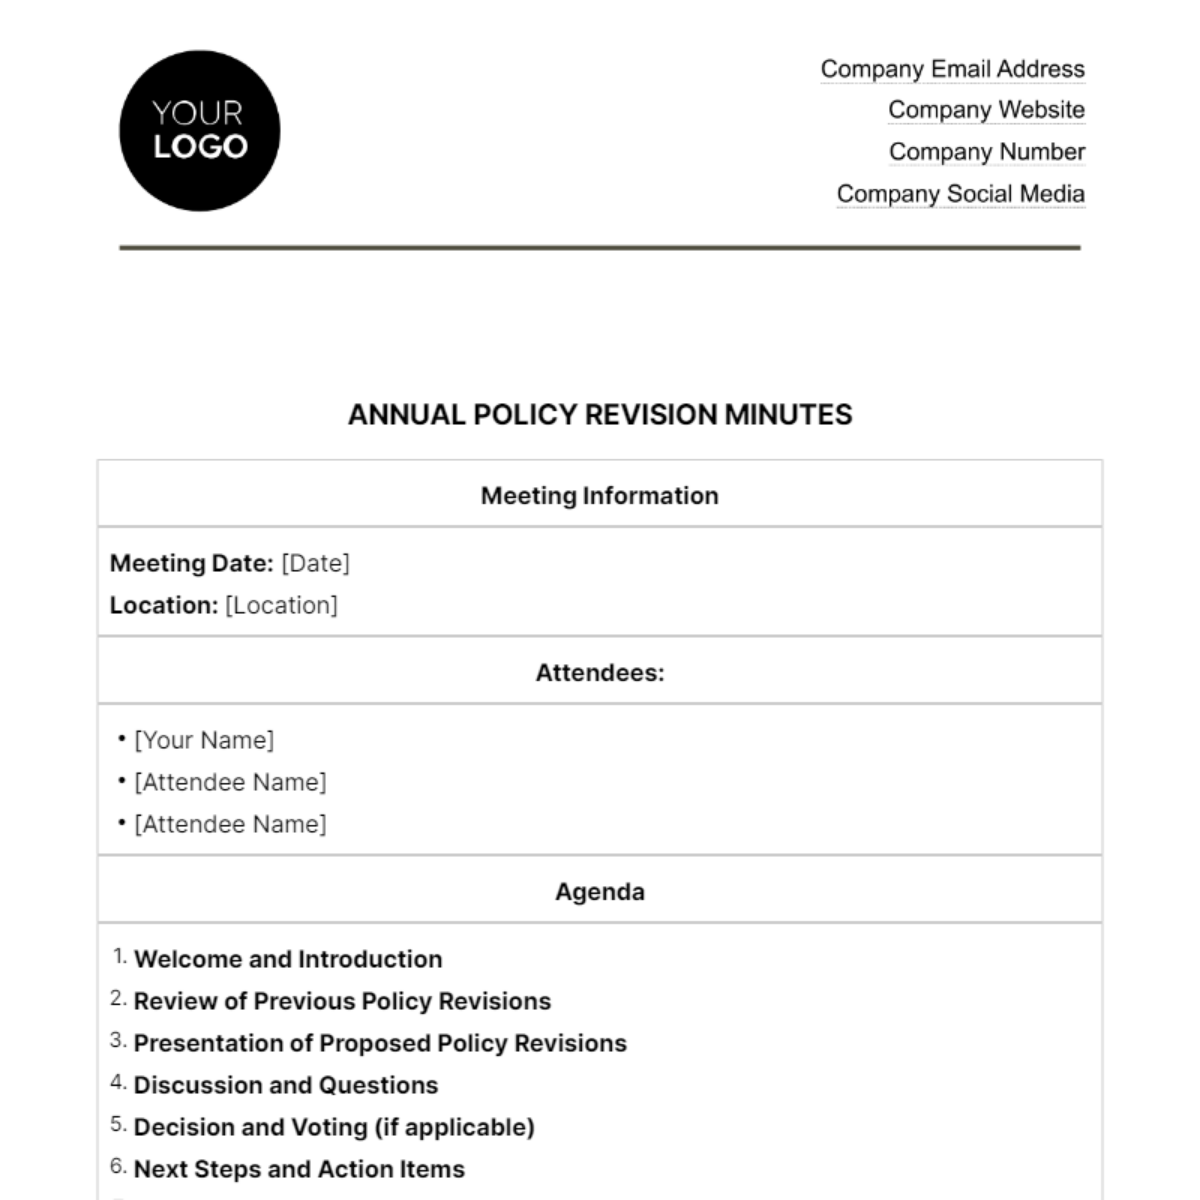 Free Annual Policy Revision Minutes HR Template